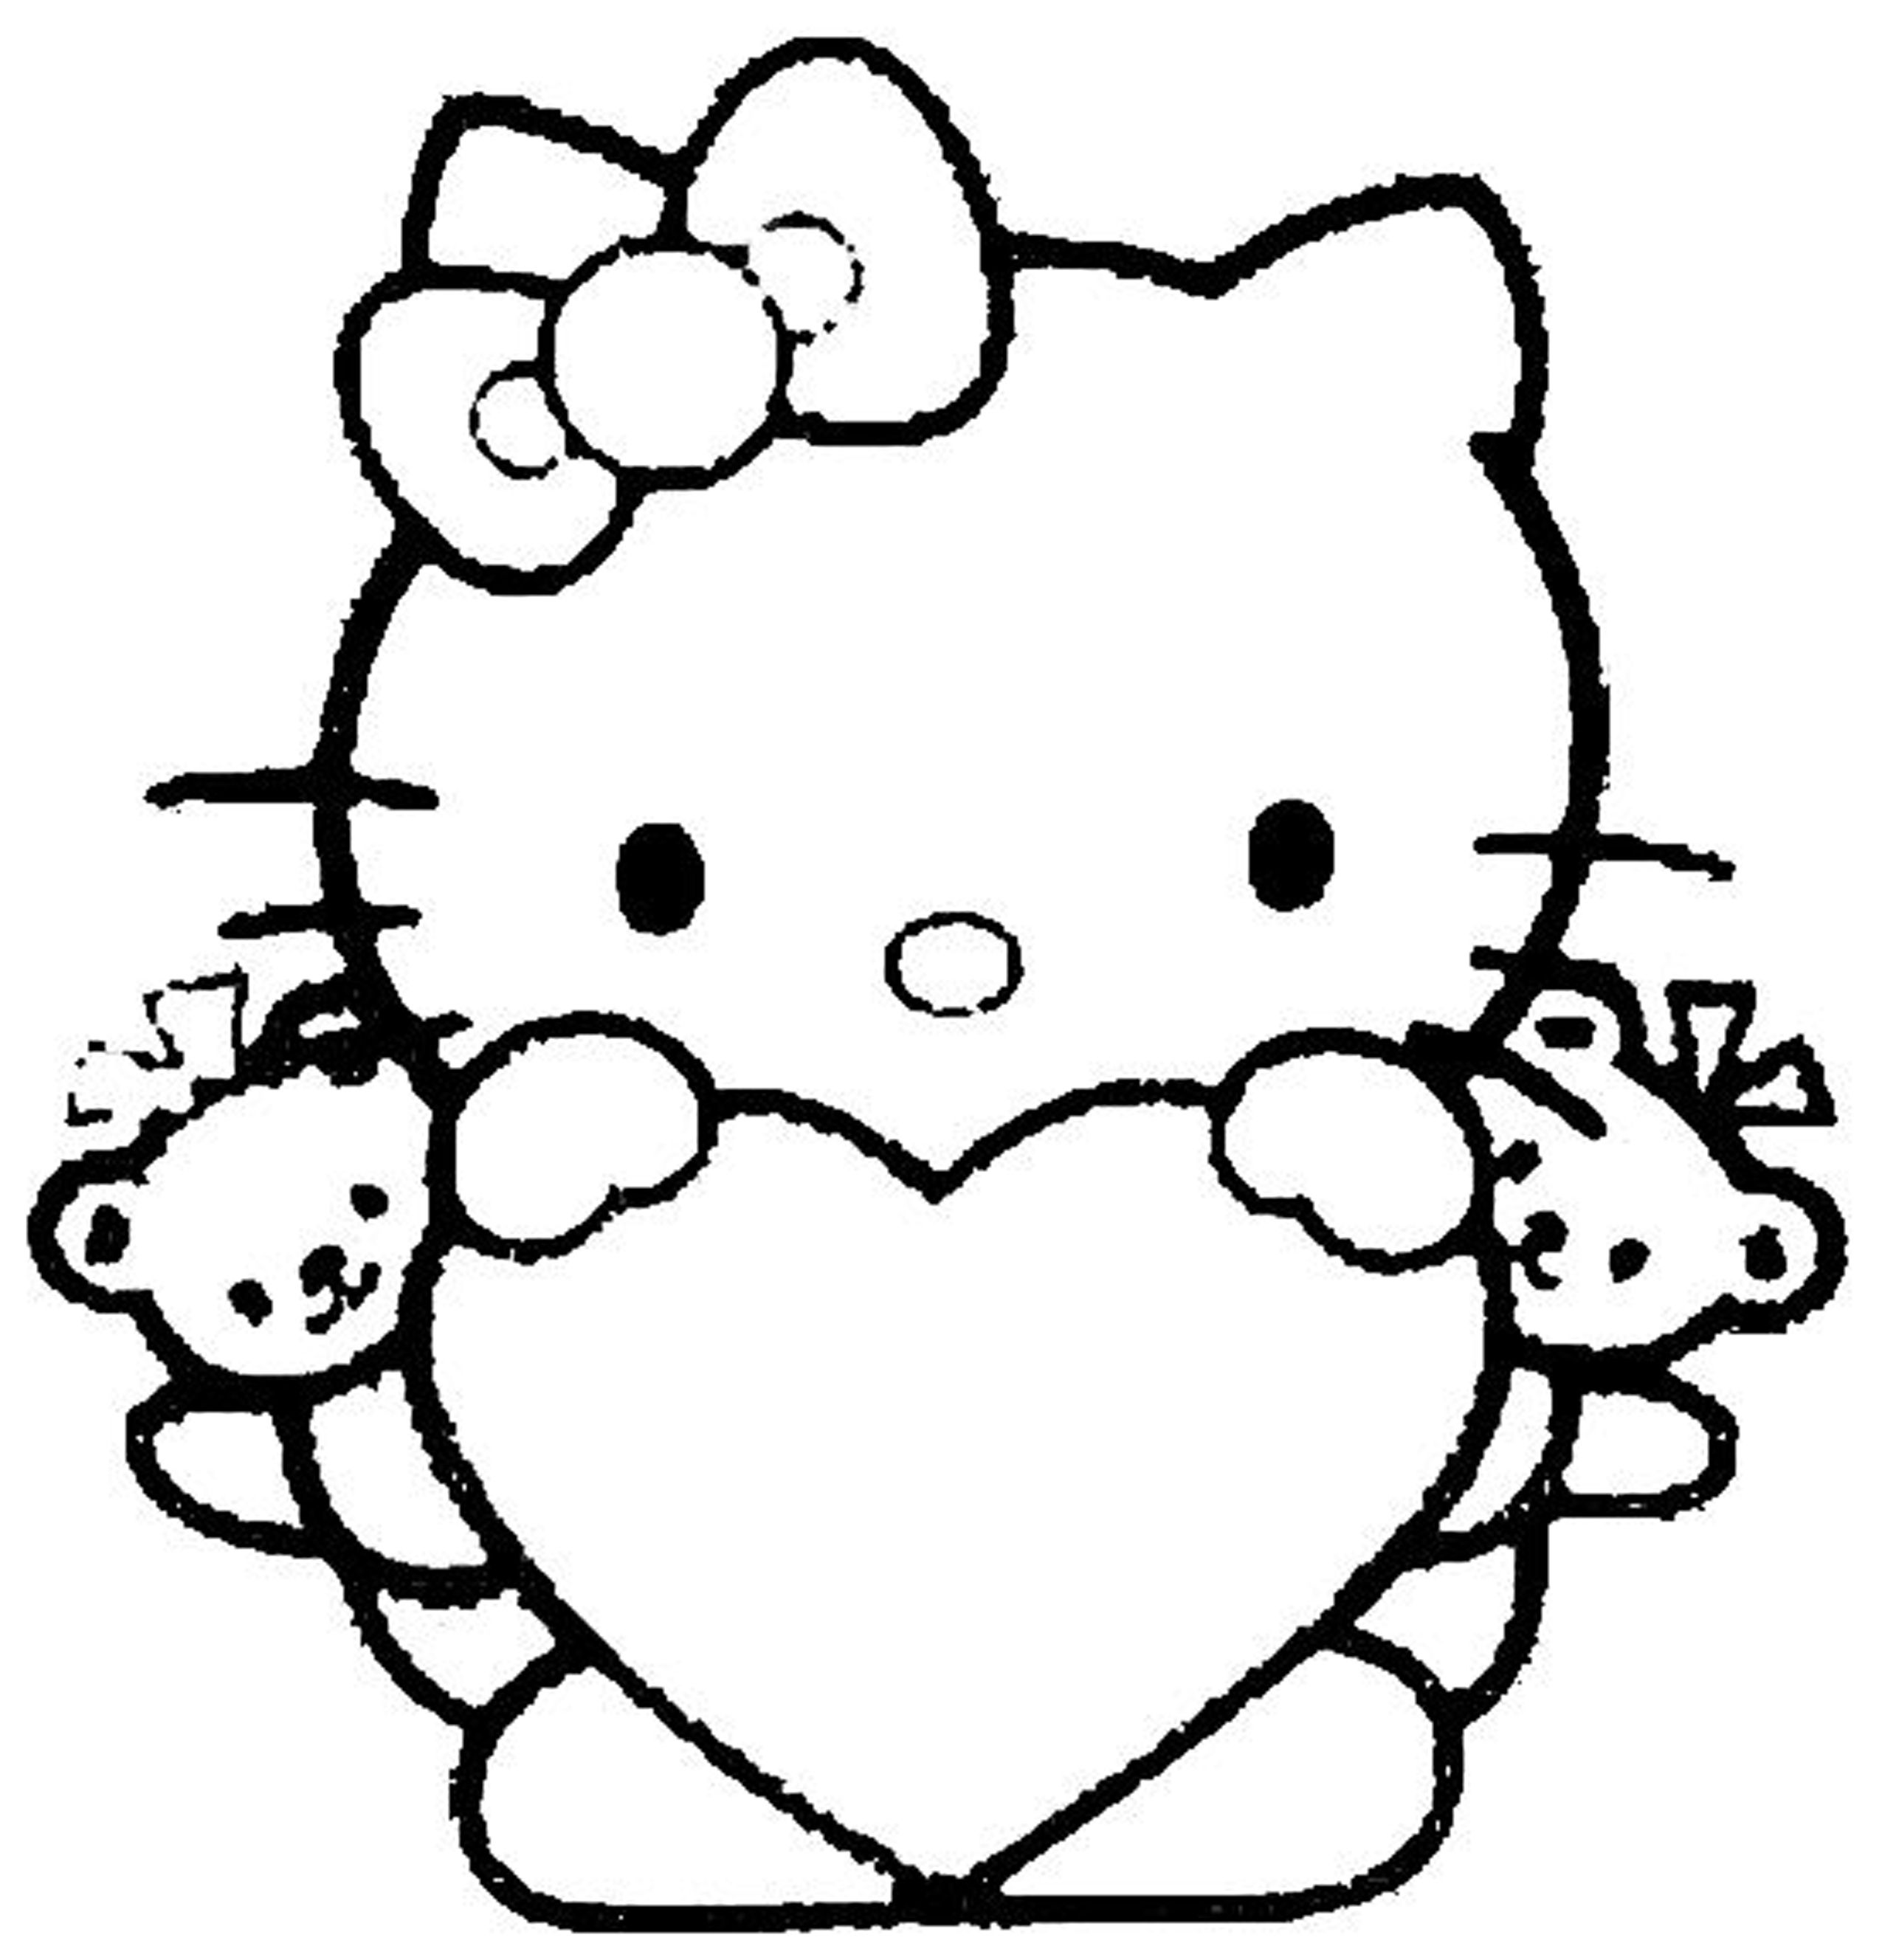 Girls Coloring Pages Easy Coloring Home